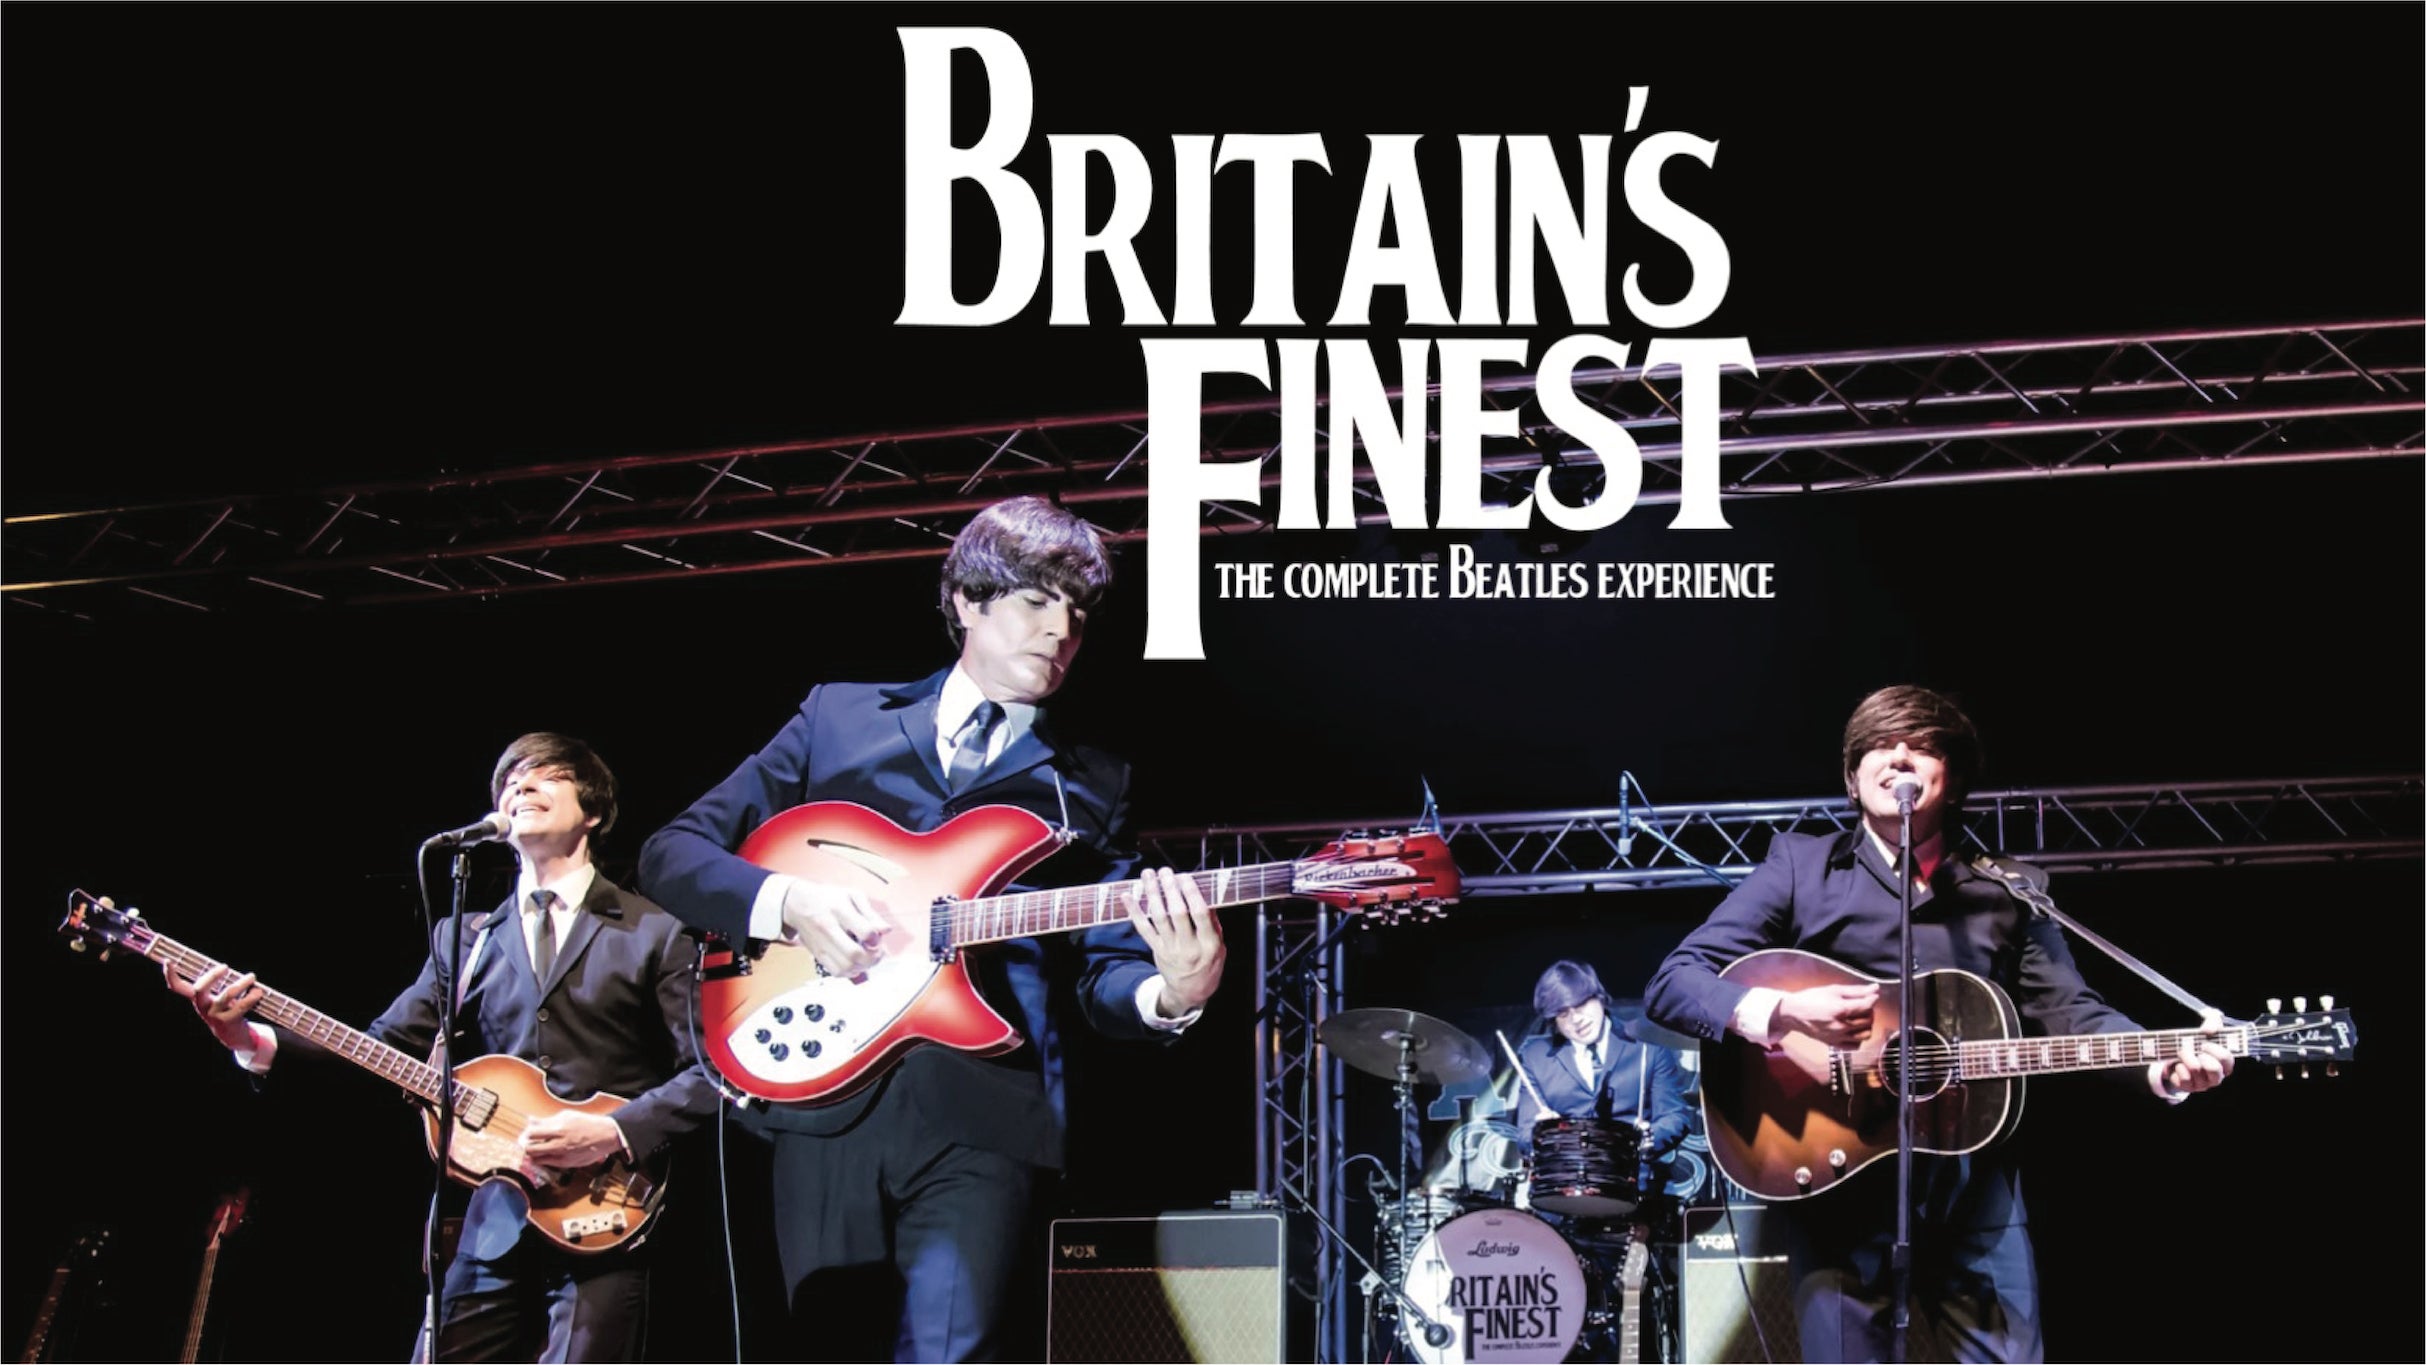 BRITAIN'S FINEST-Tribute to The Beatles